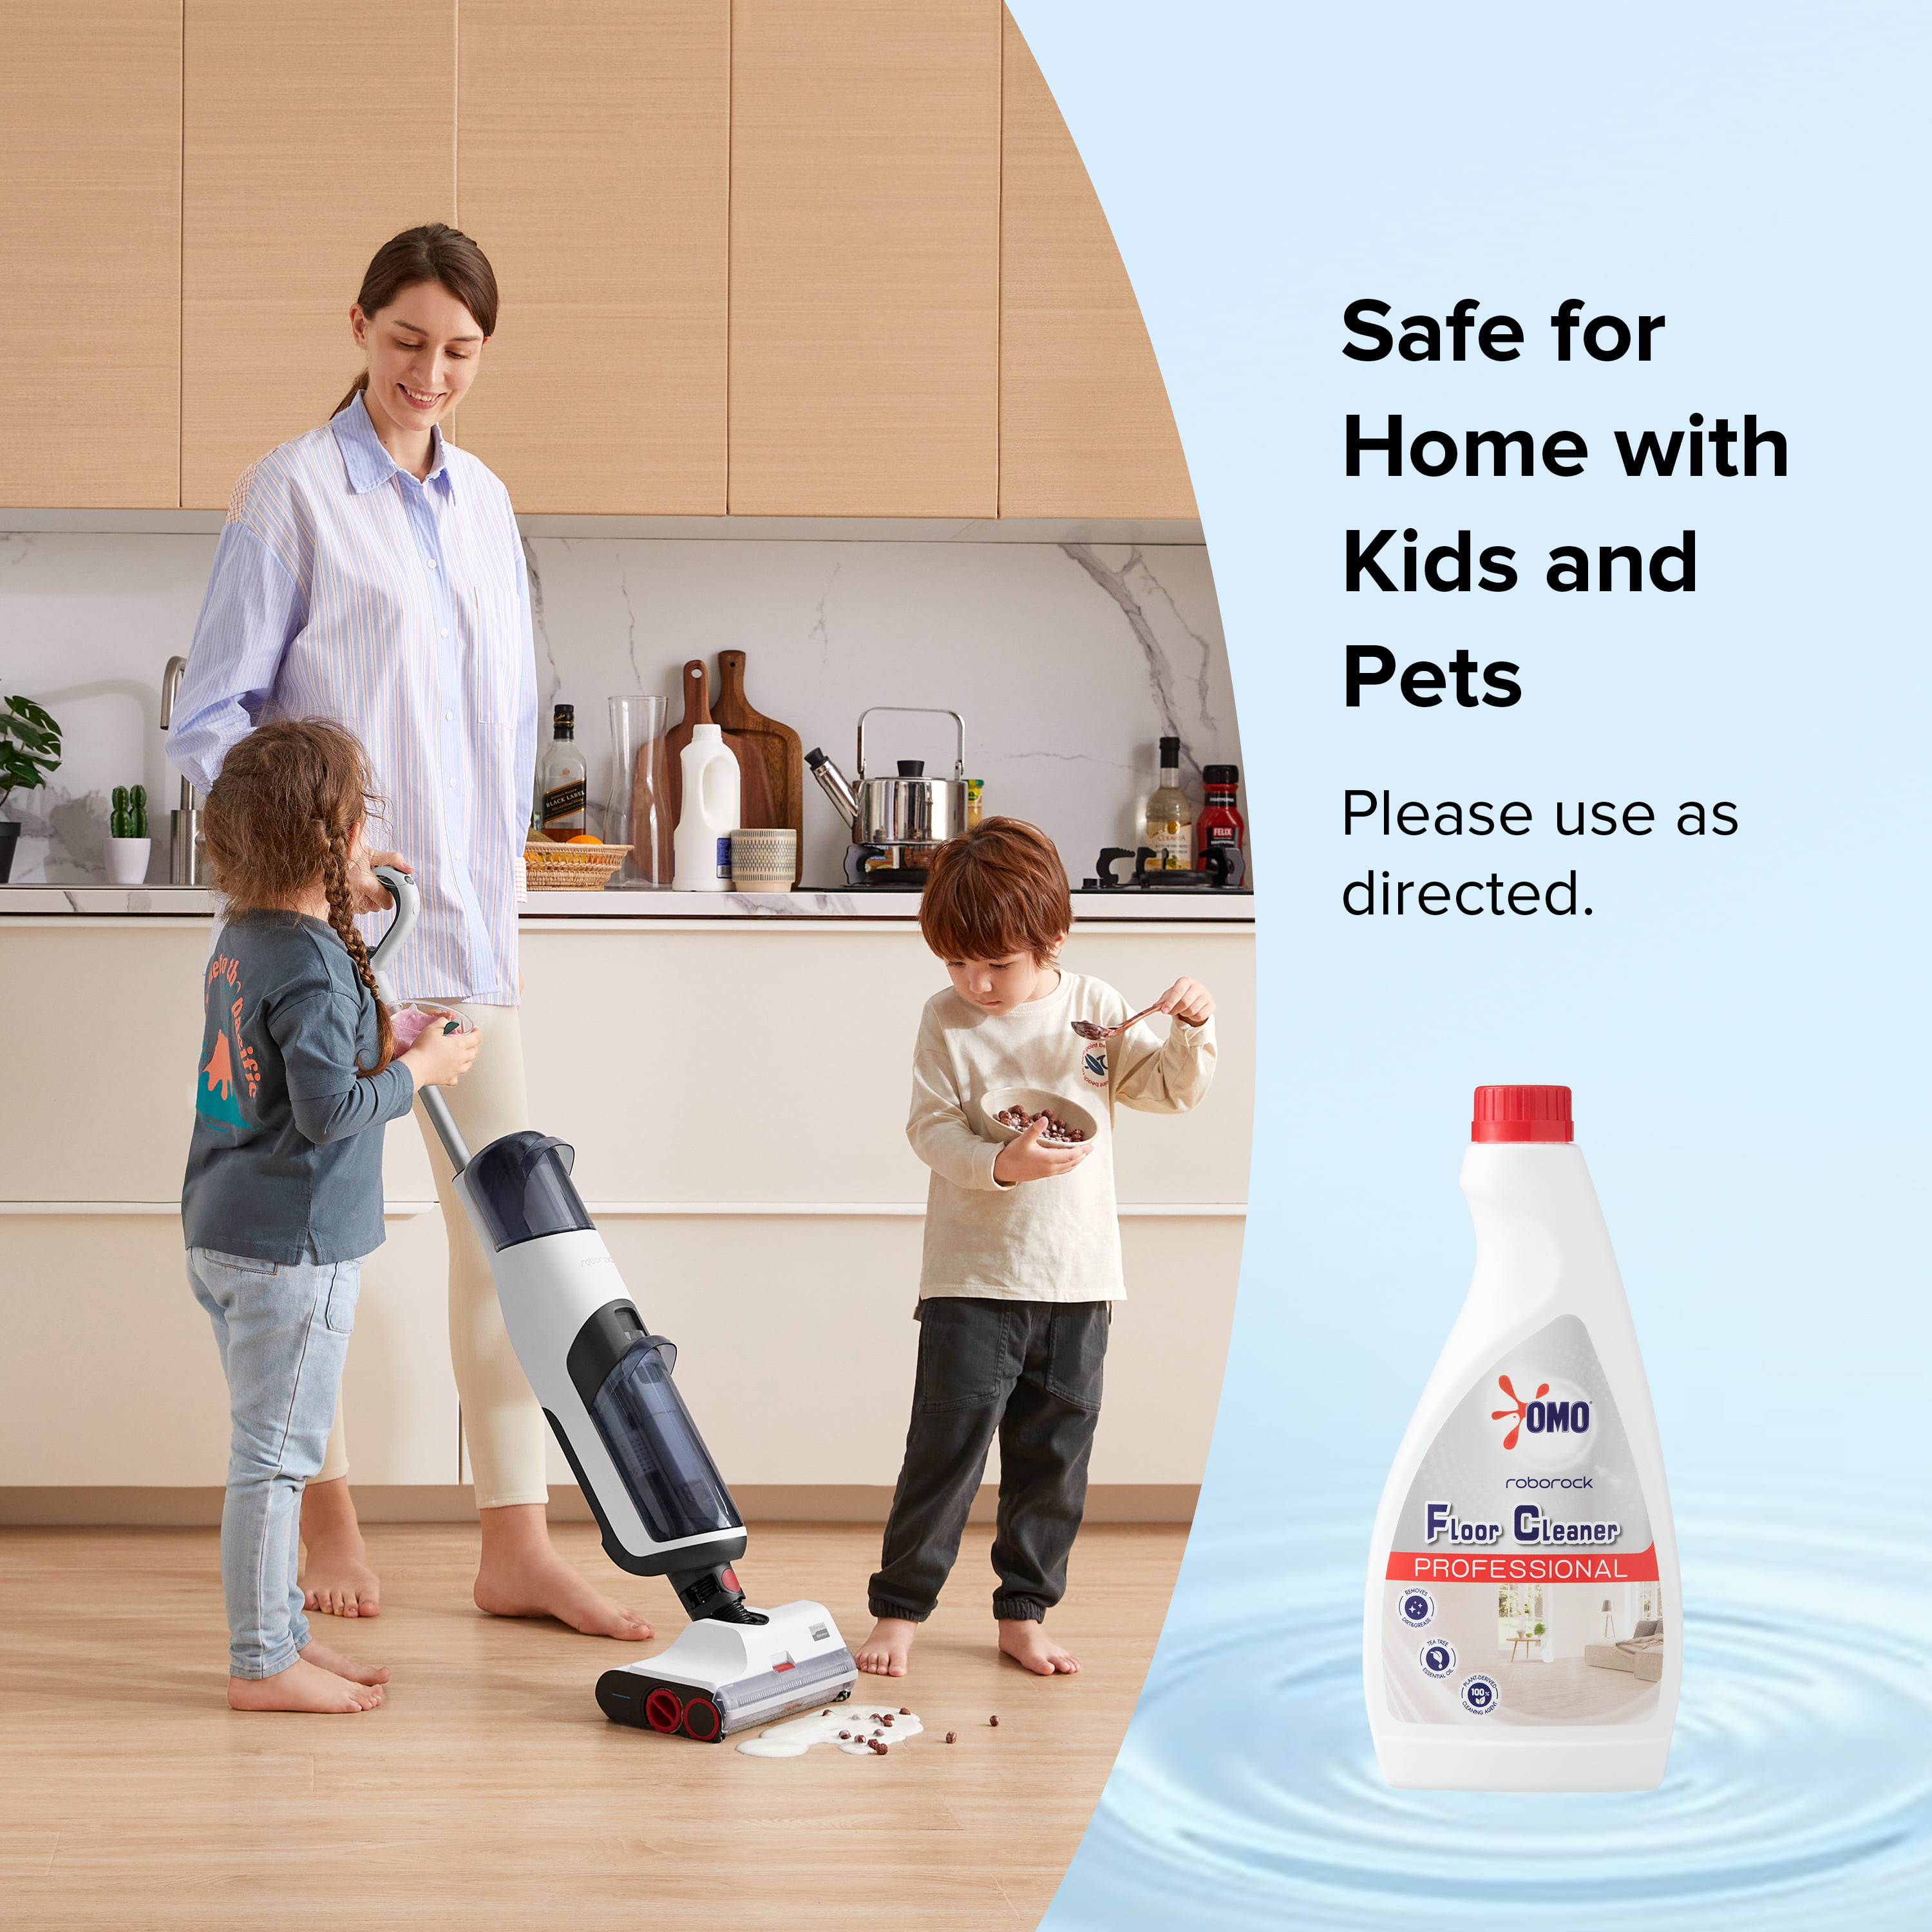 Roborock OMO Multi-Surface Floor Cleaning Solution - Cleaner